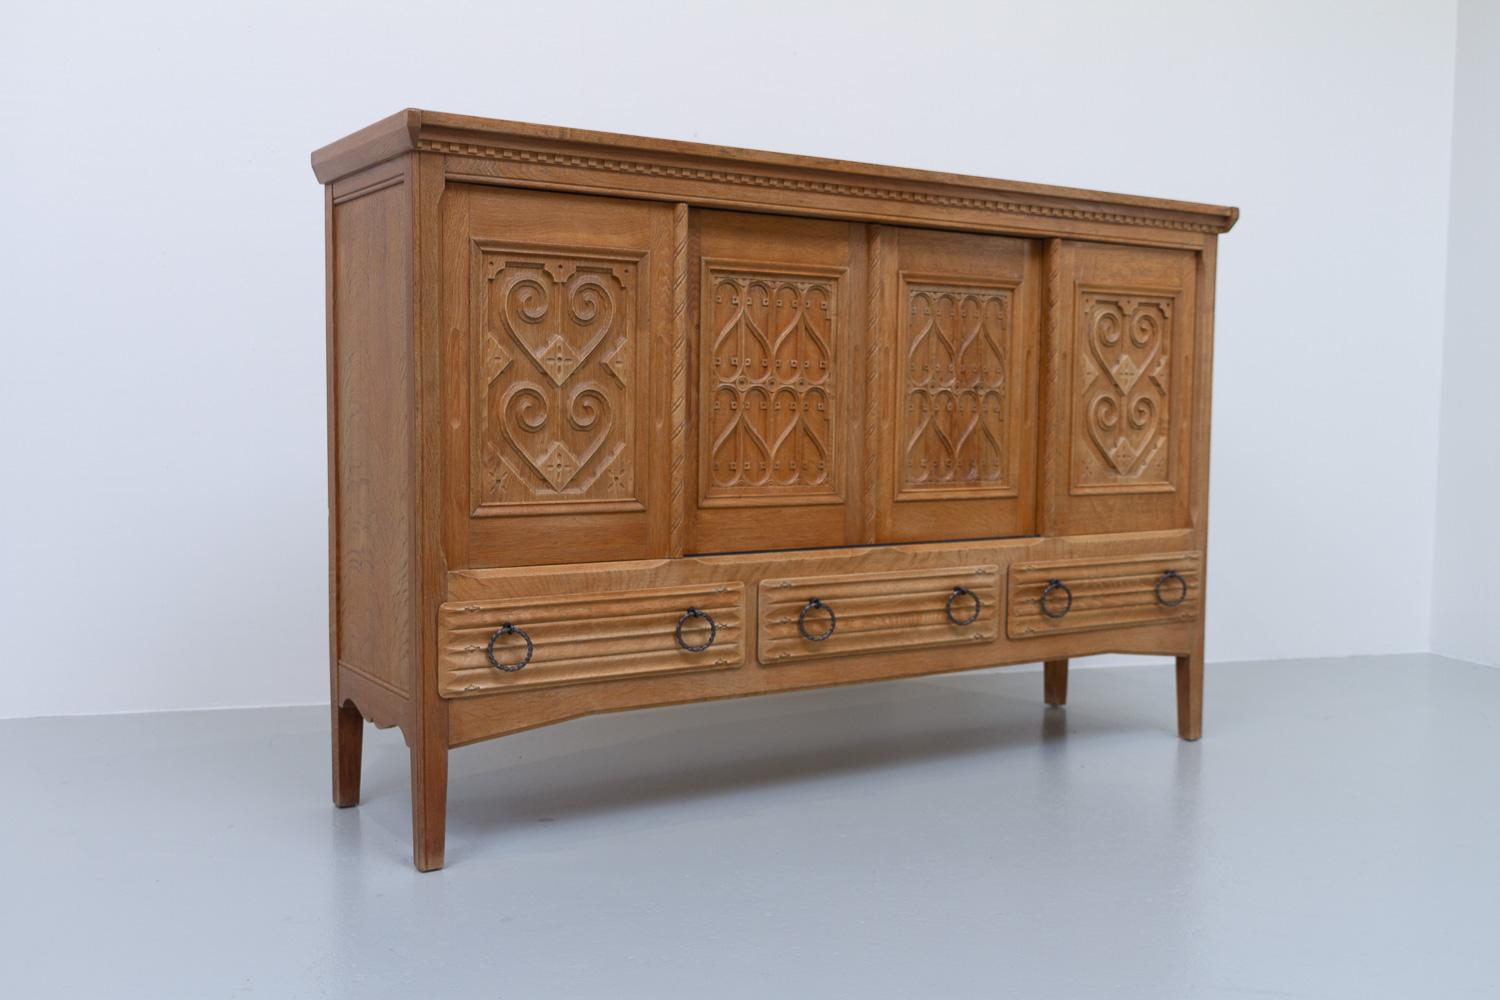 Danish Modern Brutalist Credenza in Oak, 1960s.
Beautiful and sculptural Mid-Century Modern Danish highboard in oak that offers plenty of storage space. Made in Denmark in the 1960s with intricate hand carved motifs and wrought iron drawer pulls.